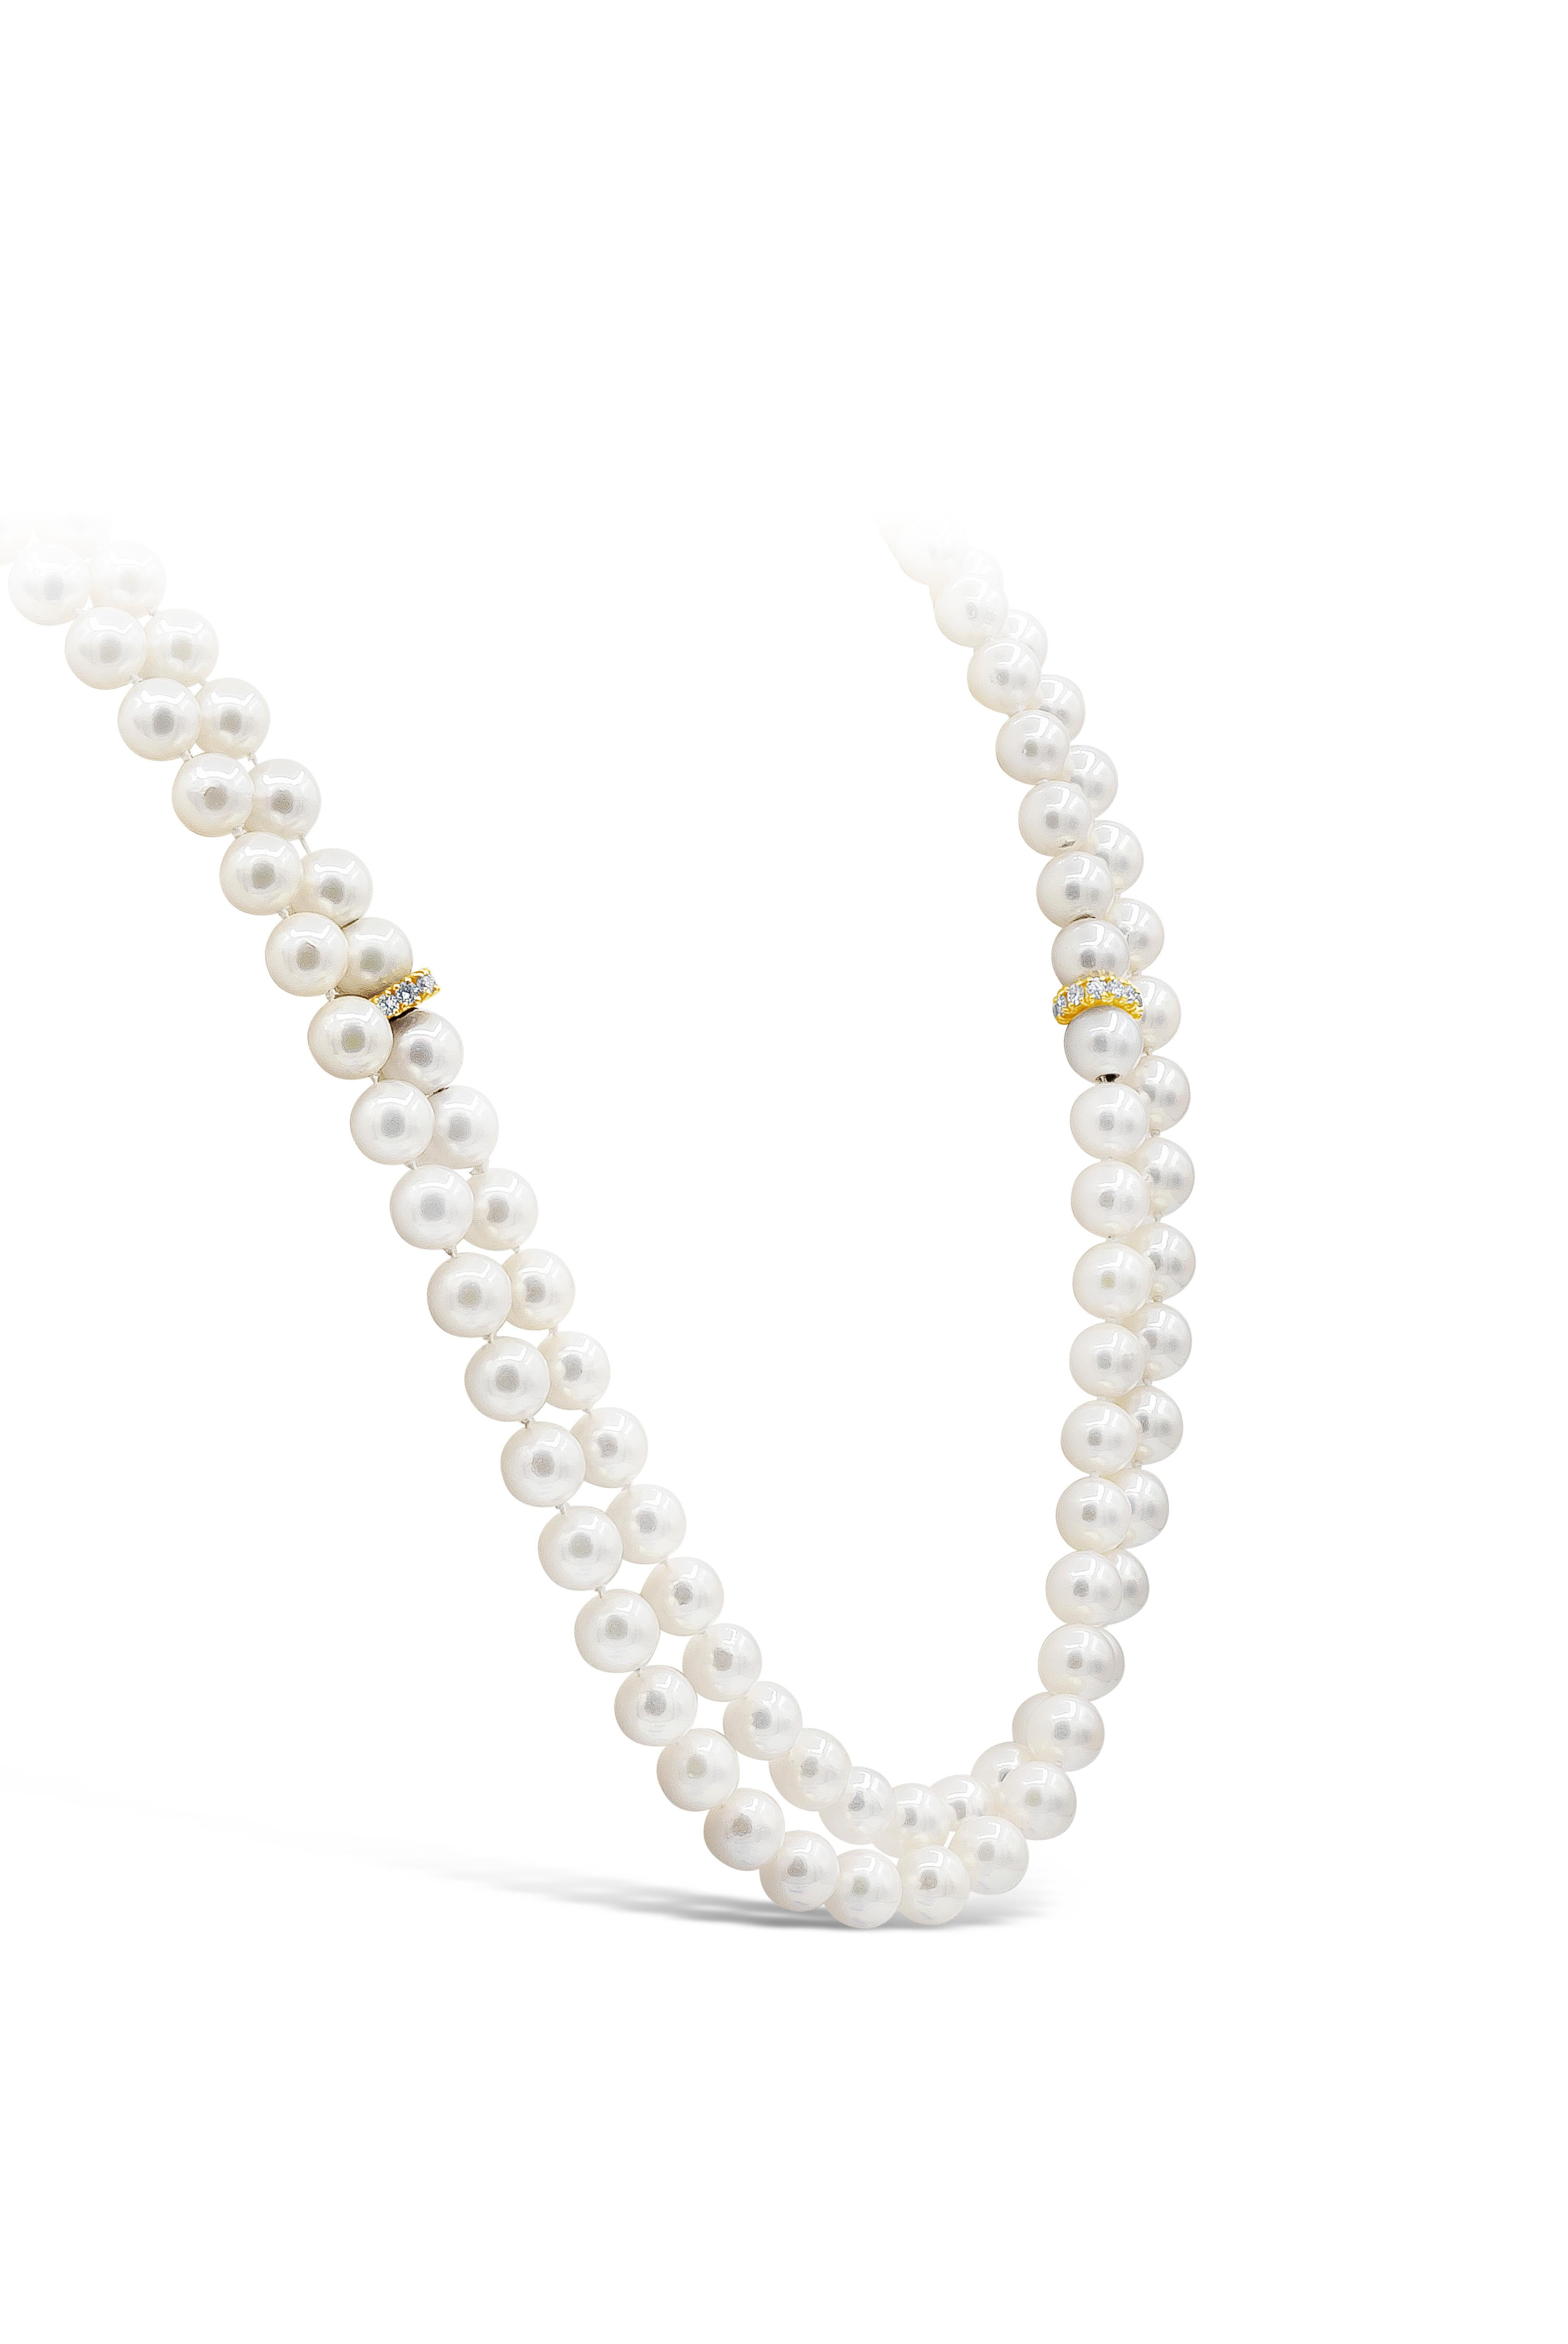 A unique and beautiful pearl necklace showcasing two separate strands of pearls that can be worn independently. It can connect to form into one long necklace. Each strand is spaced by a disc set with round diamonds weighing 1.00 carats total. Pearls